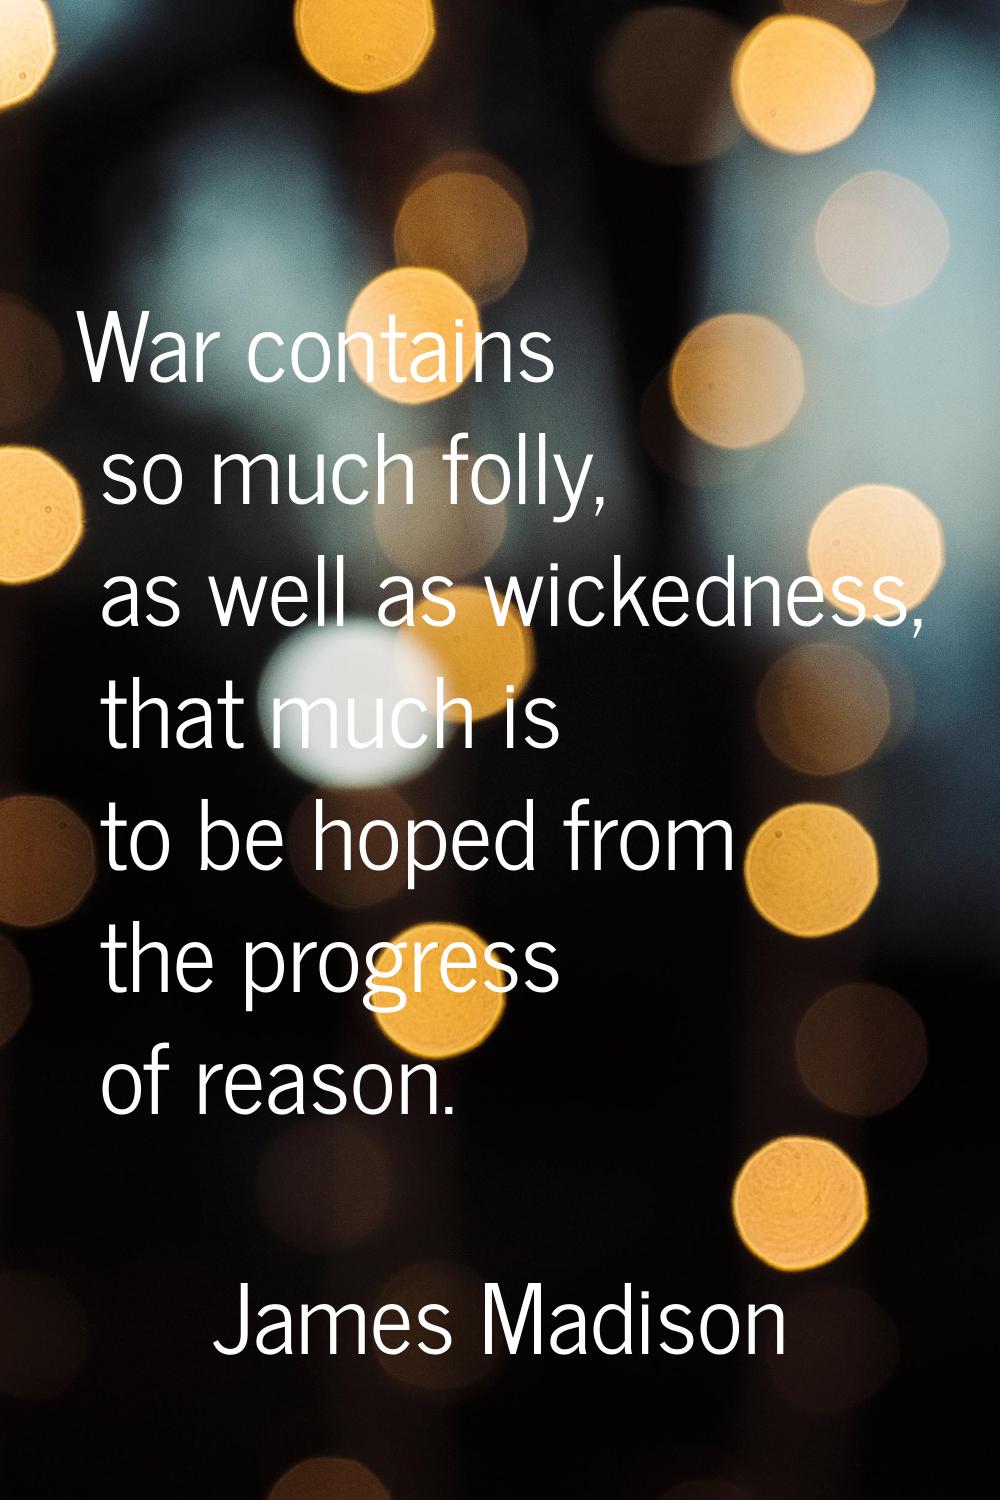 War contains so much folly, as well as wickedness, that much is to be hoped from the progress of re